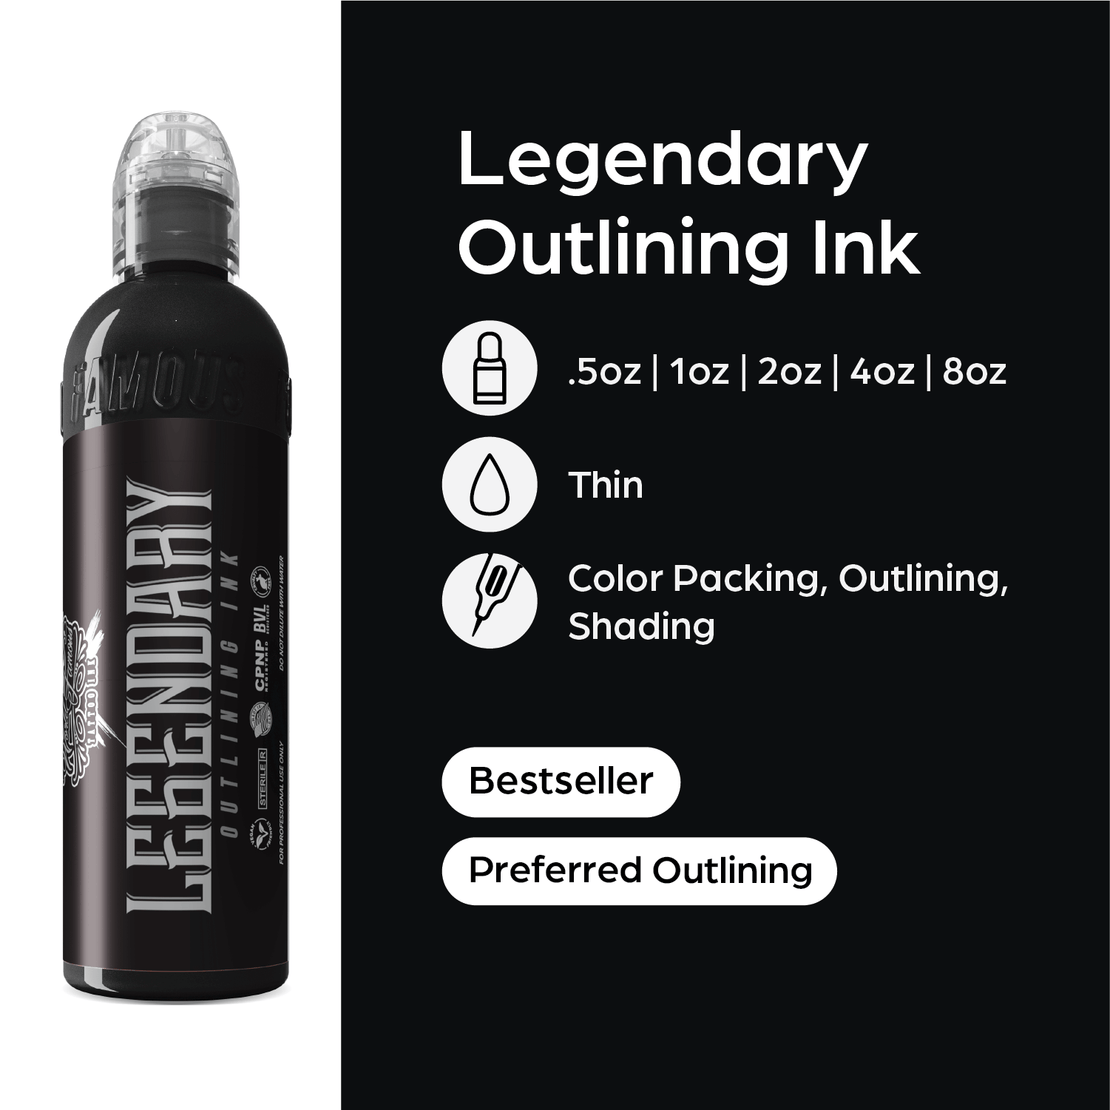 World Famous Legendary Outlining Ink